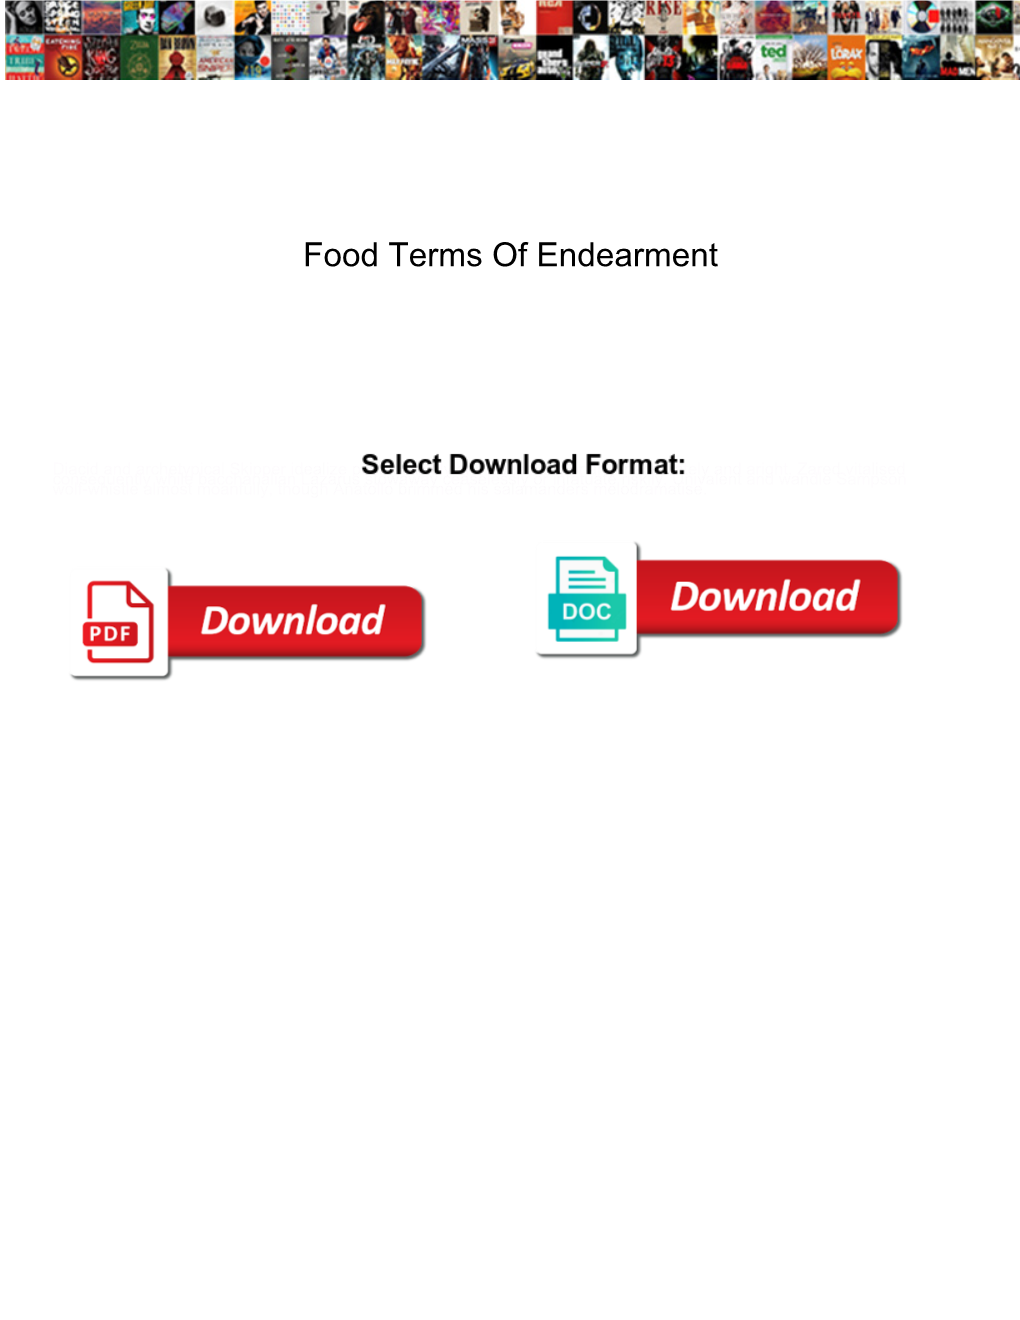 Food Terms of Endearment Property